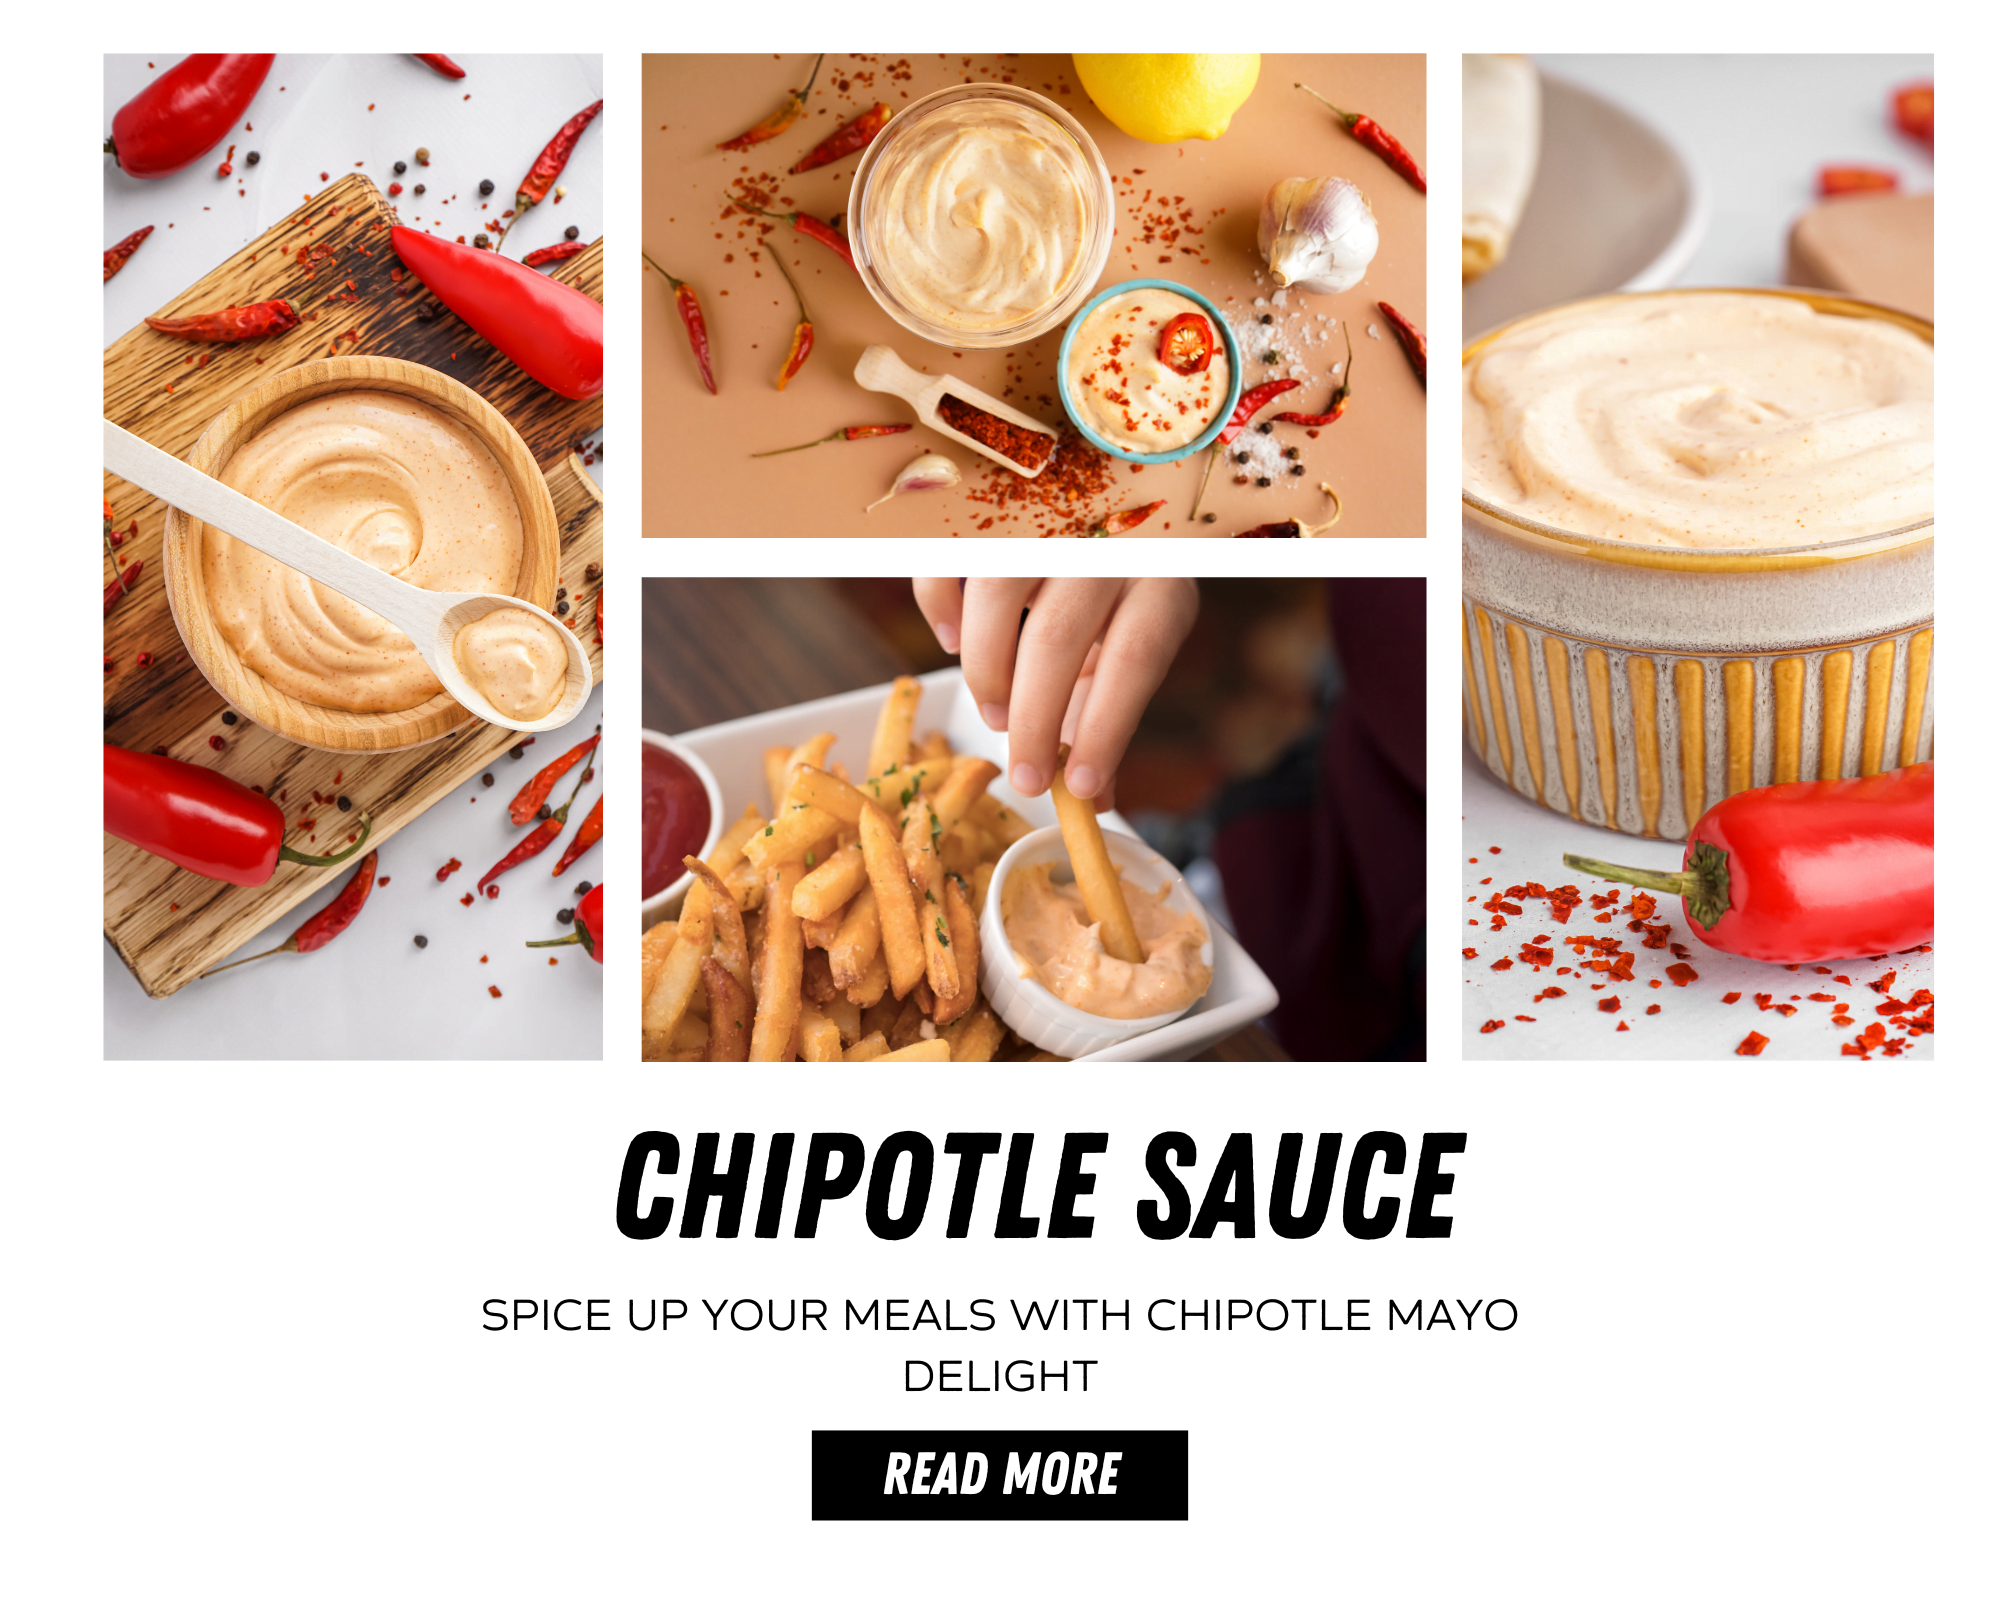 SPICE UP YOUR MEALS WITH CHIPOTLE MAYO DELIGHT